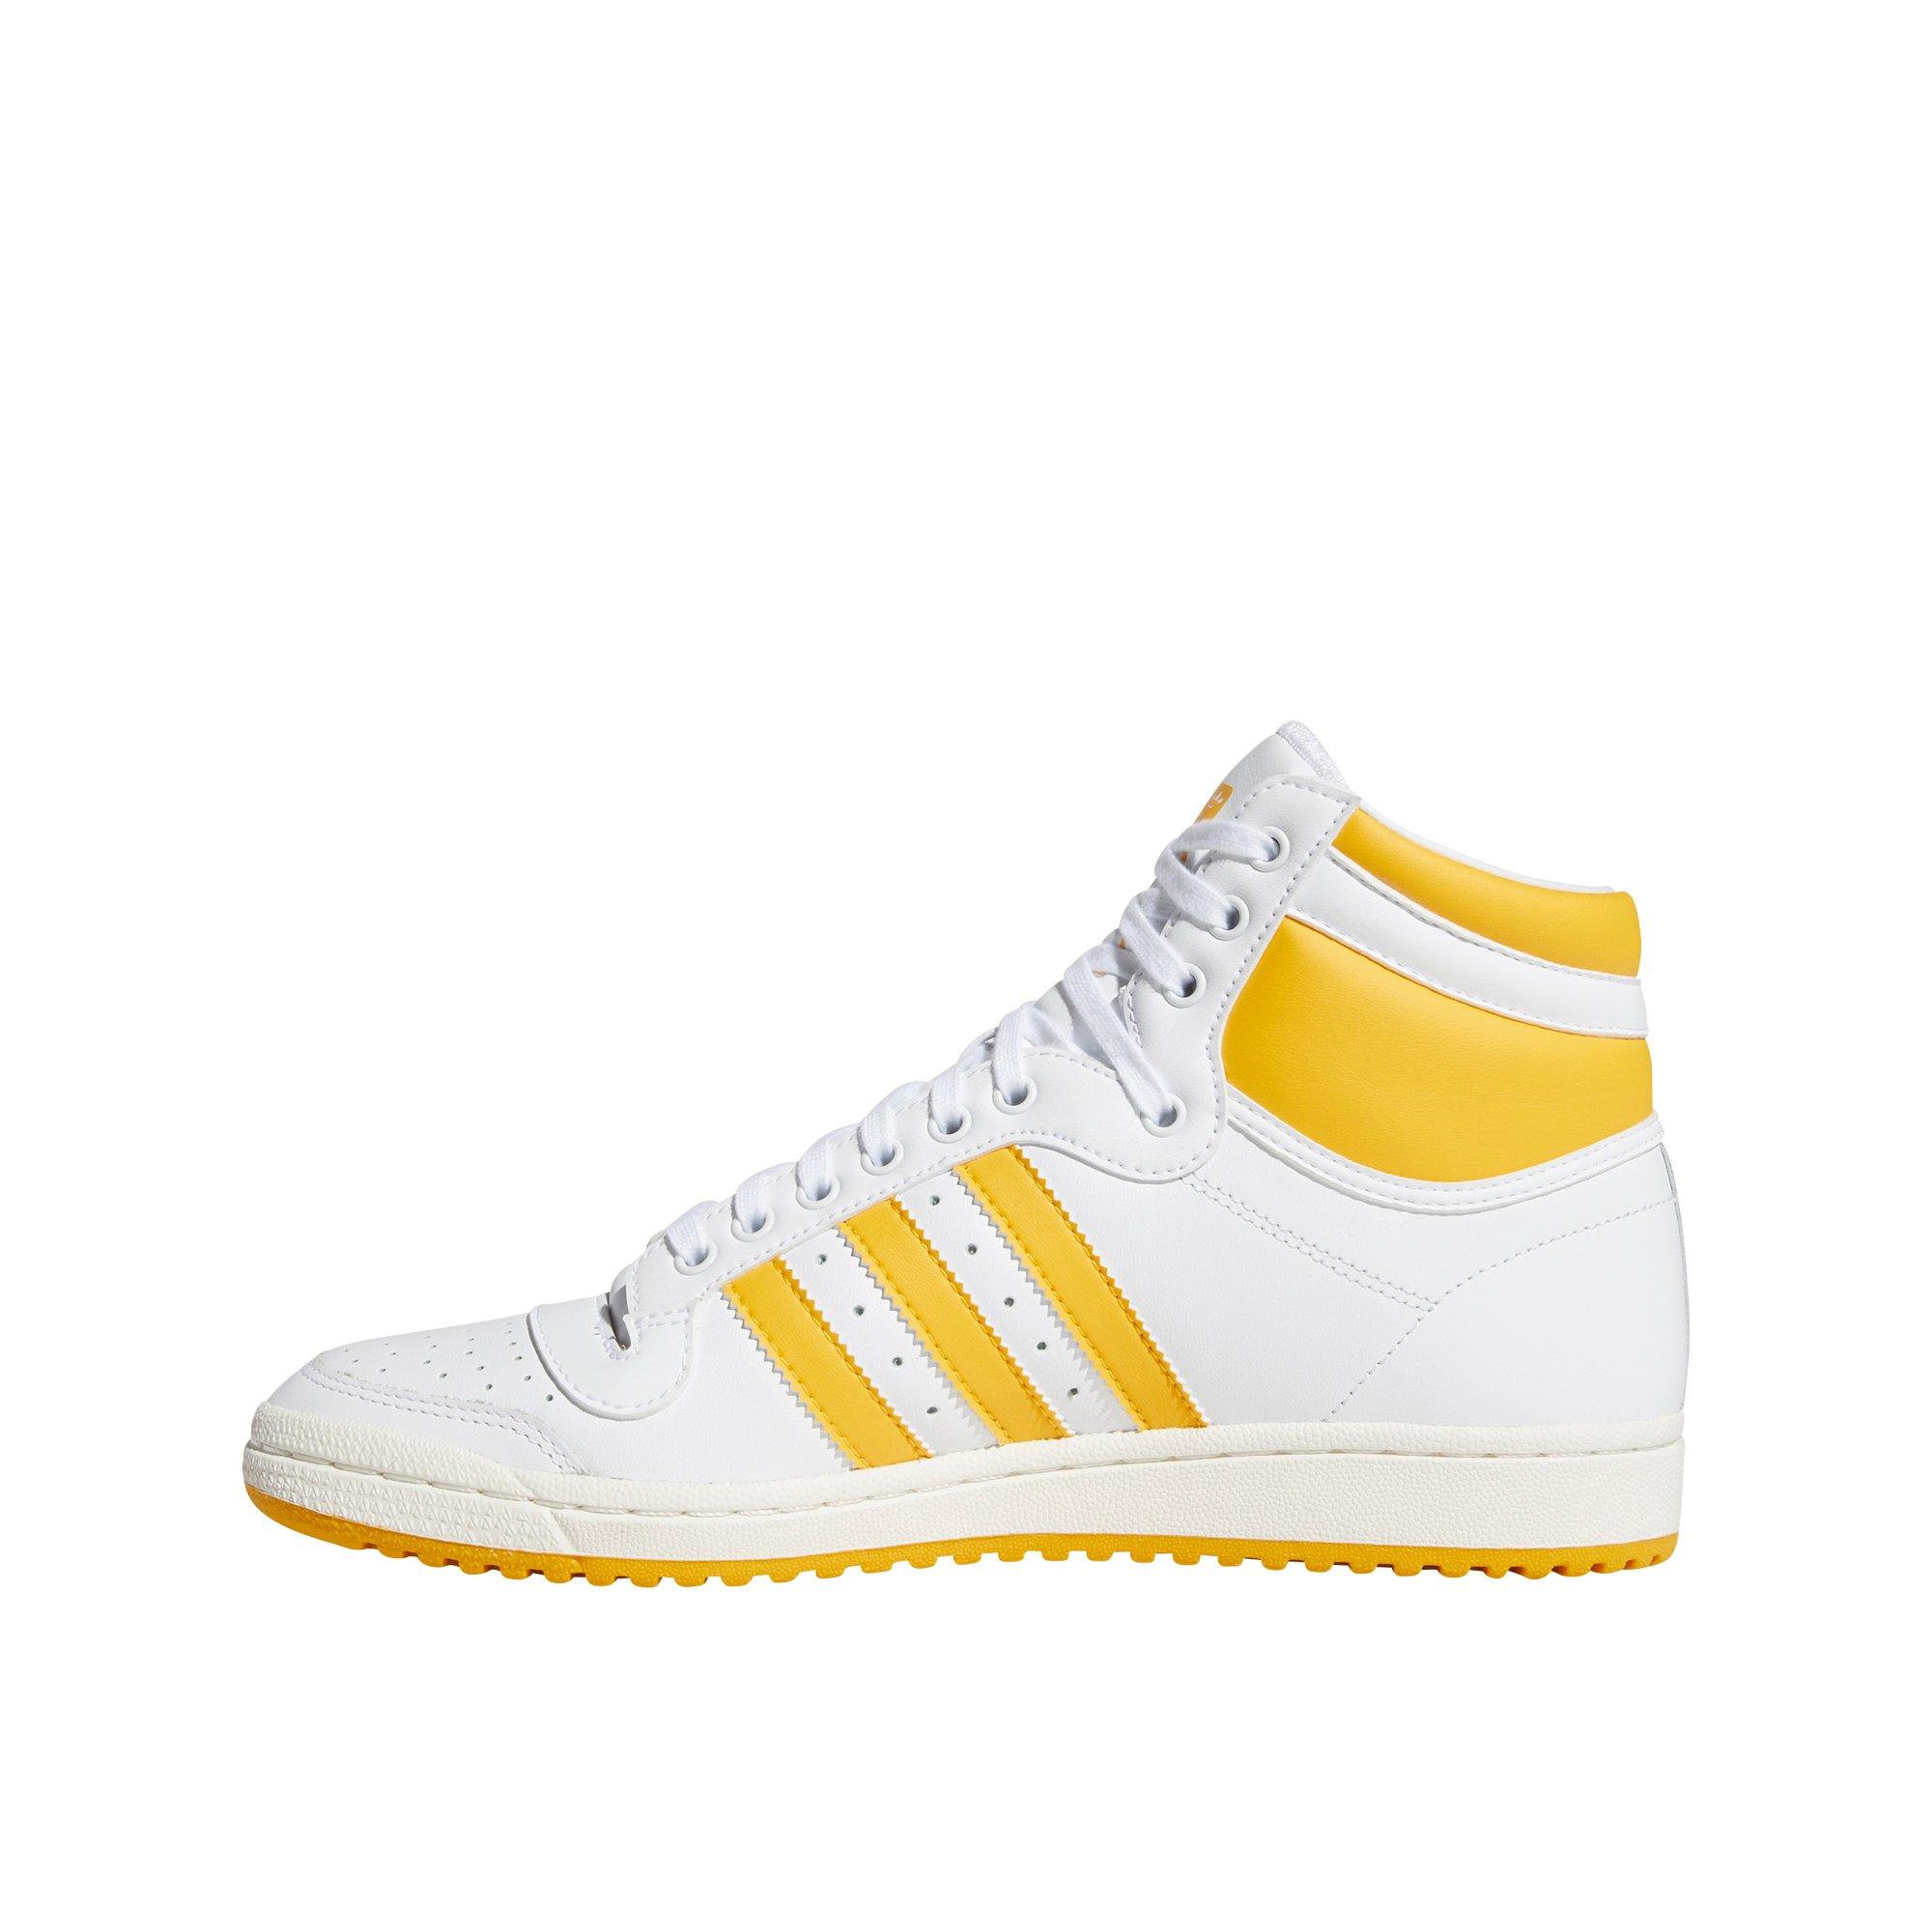 yellow and white top tens